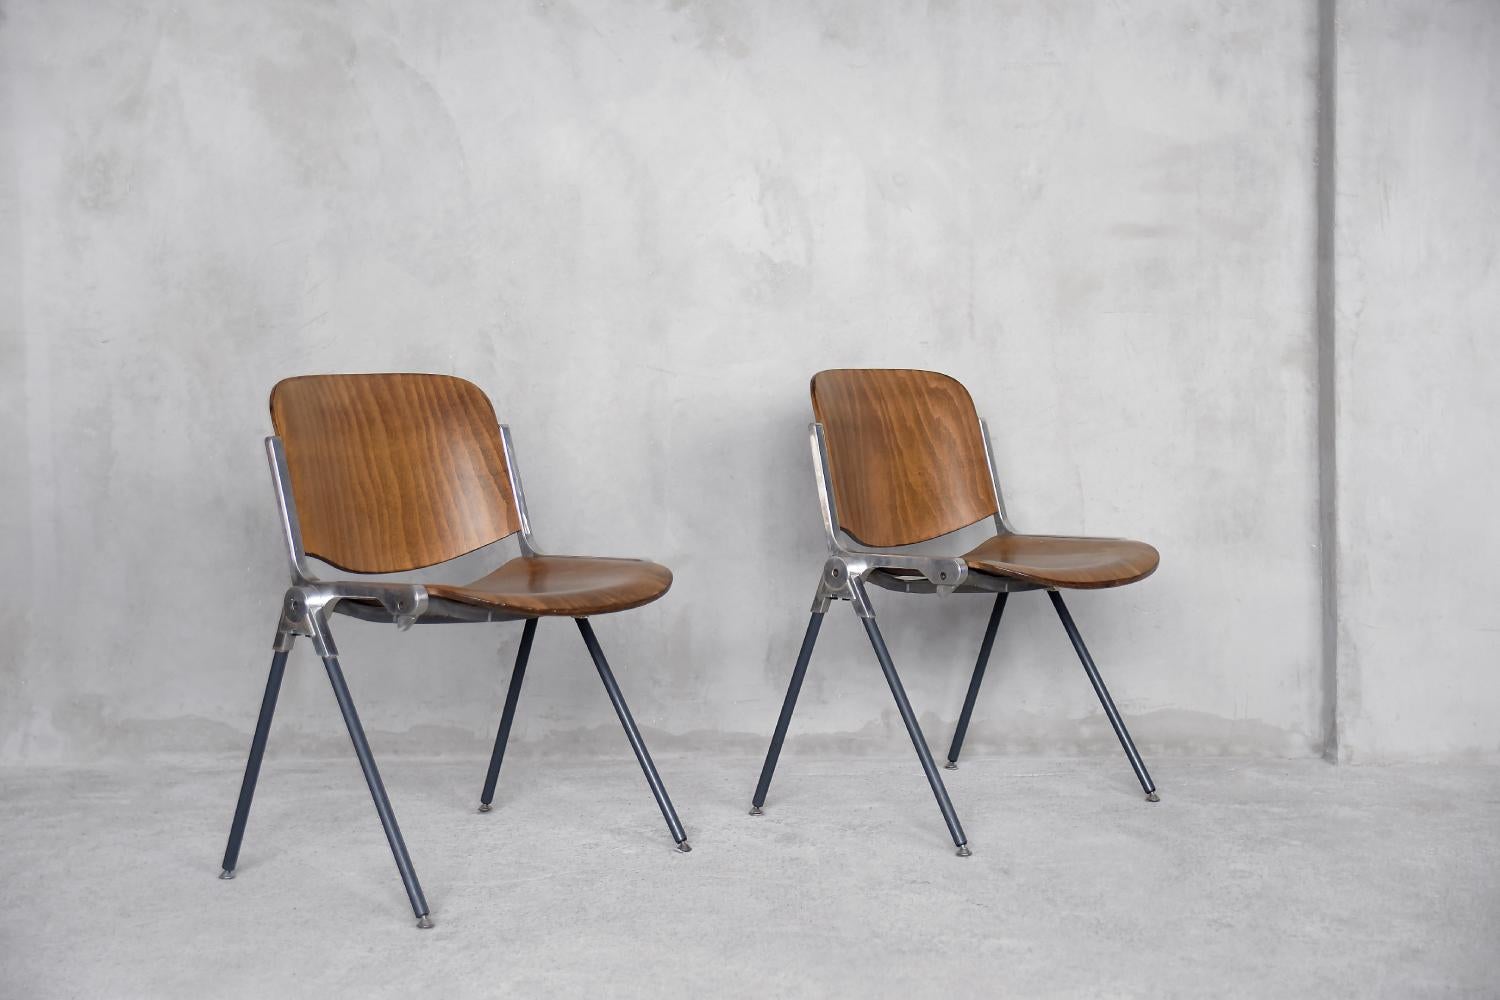 This set of two chairs was made by an Italian manufacture during the 1960s. The frame is made of anodized aluminum. The seat and backrest are made of bent plywood. The furniture made of this material combines the simply form with the natural